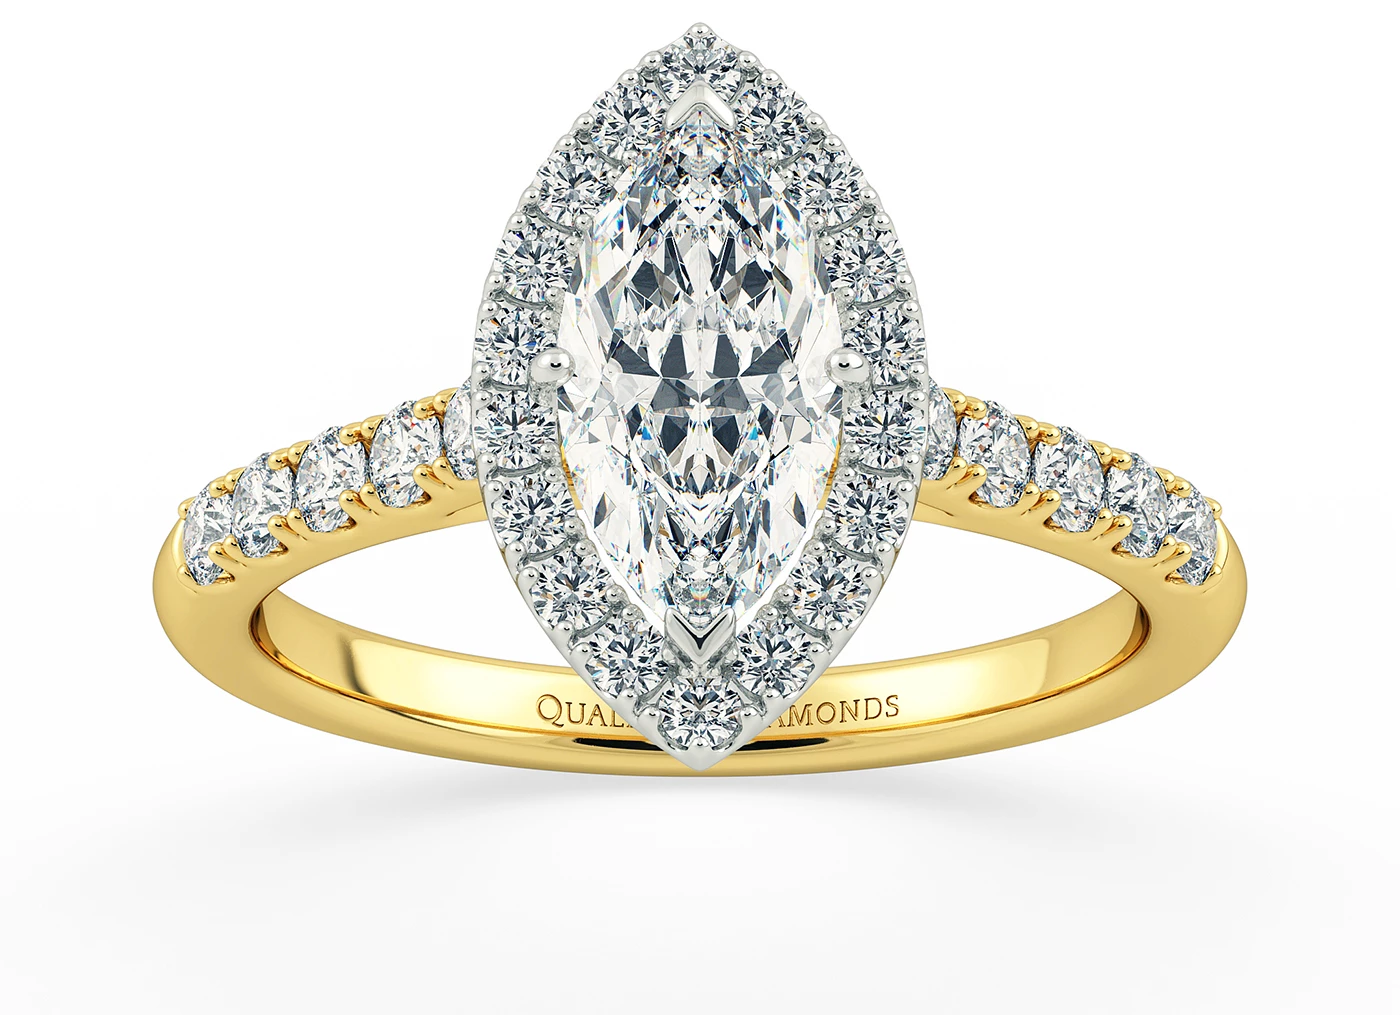 One Carat Marquise Halo Diamond Ring in 18K Yellow Gold